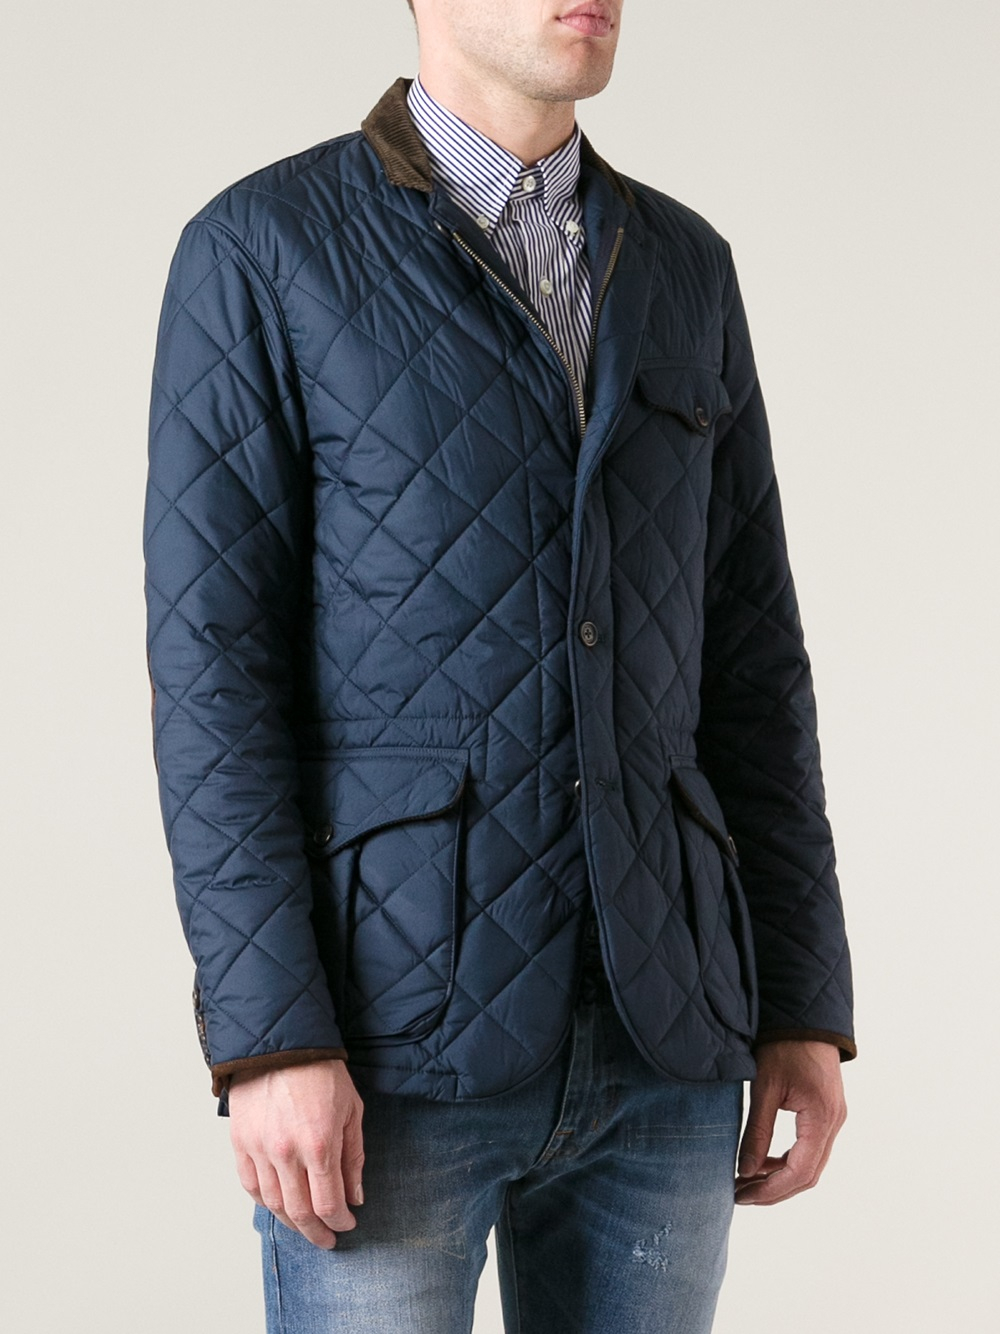 Polo Ralph Lauren Quilted Jacket in Blue for Men - Lyst